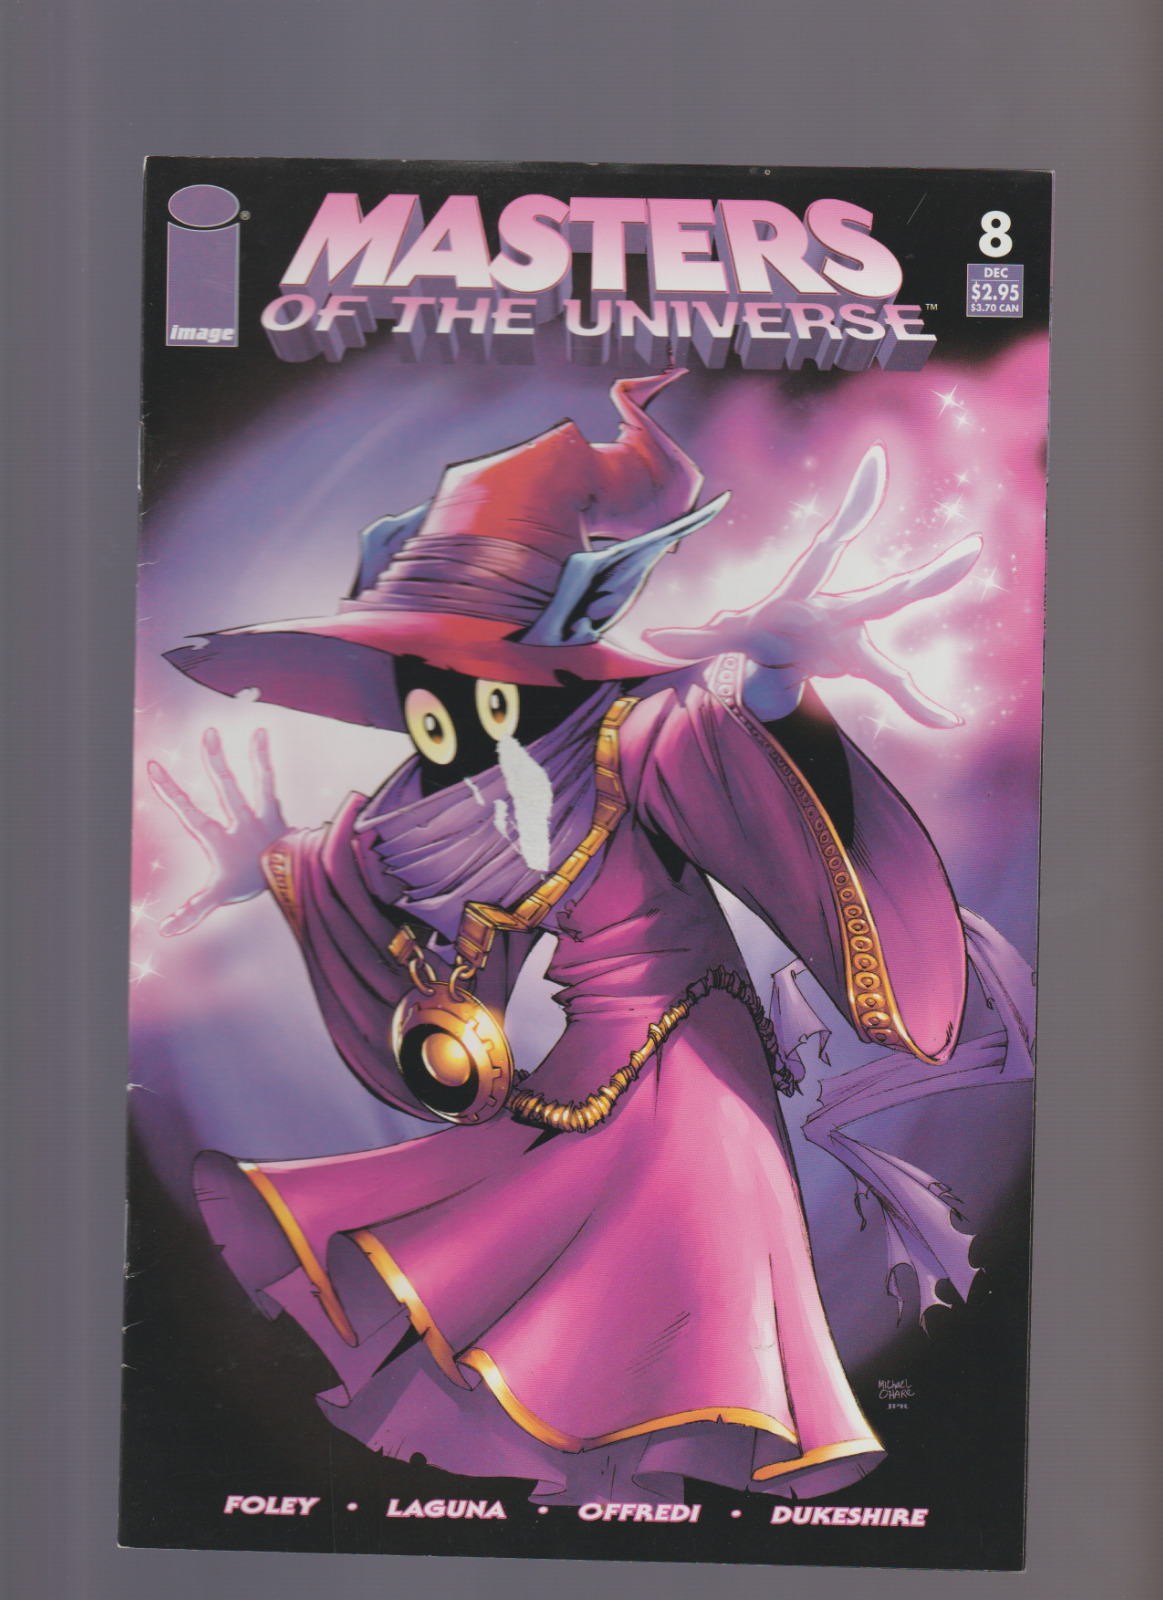 MASTERS OF THE UNIVERSE #8 HE MAN (2004) FINAL ISSUE LOW PRINT ORKO COVER -READ